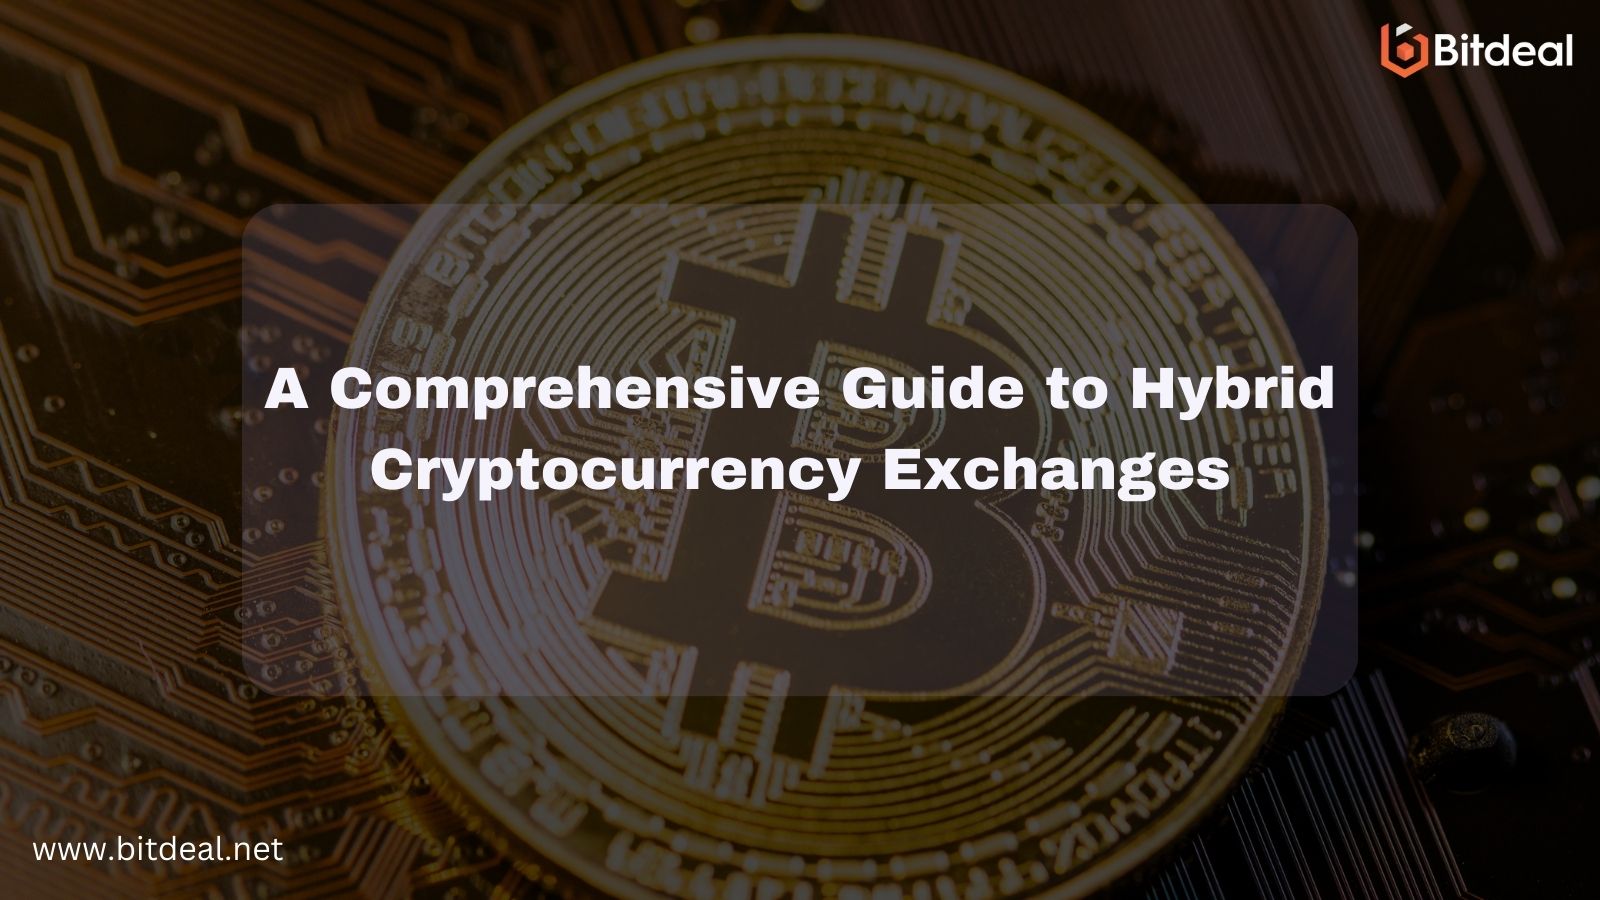 A Comprehensive Guide to Hybrid Cryptocurrency Exchanges